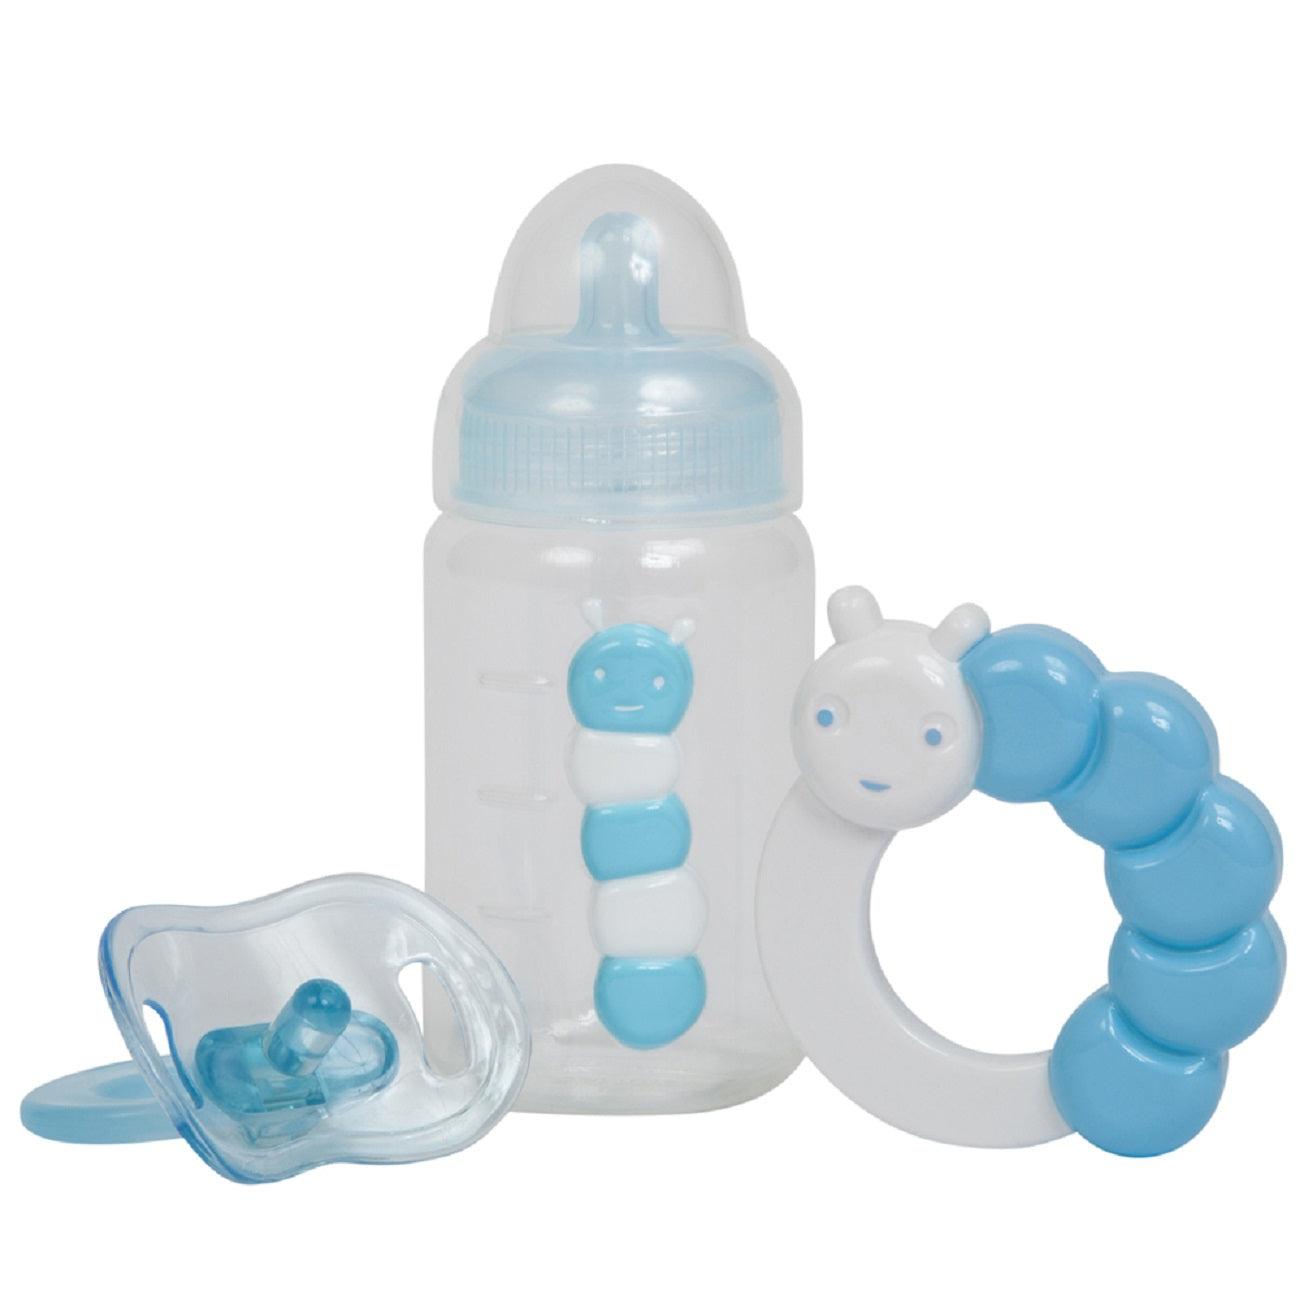 For Keeps! BLUE Bottle Rattle and Pacifier Accessory Gift Set 3-Pieces. Fits Most Dolls - Ages 2+ - JC Toys Group Inc.